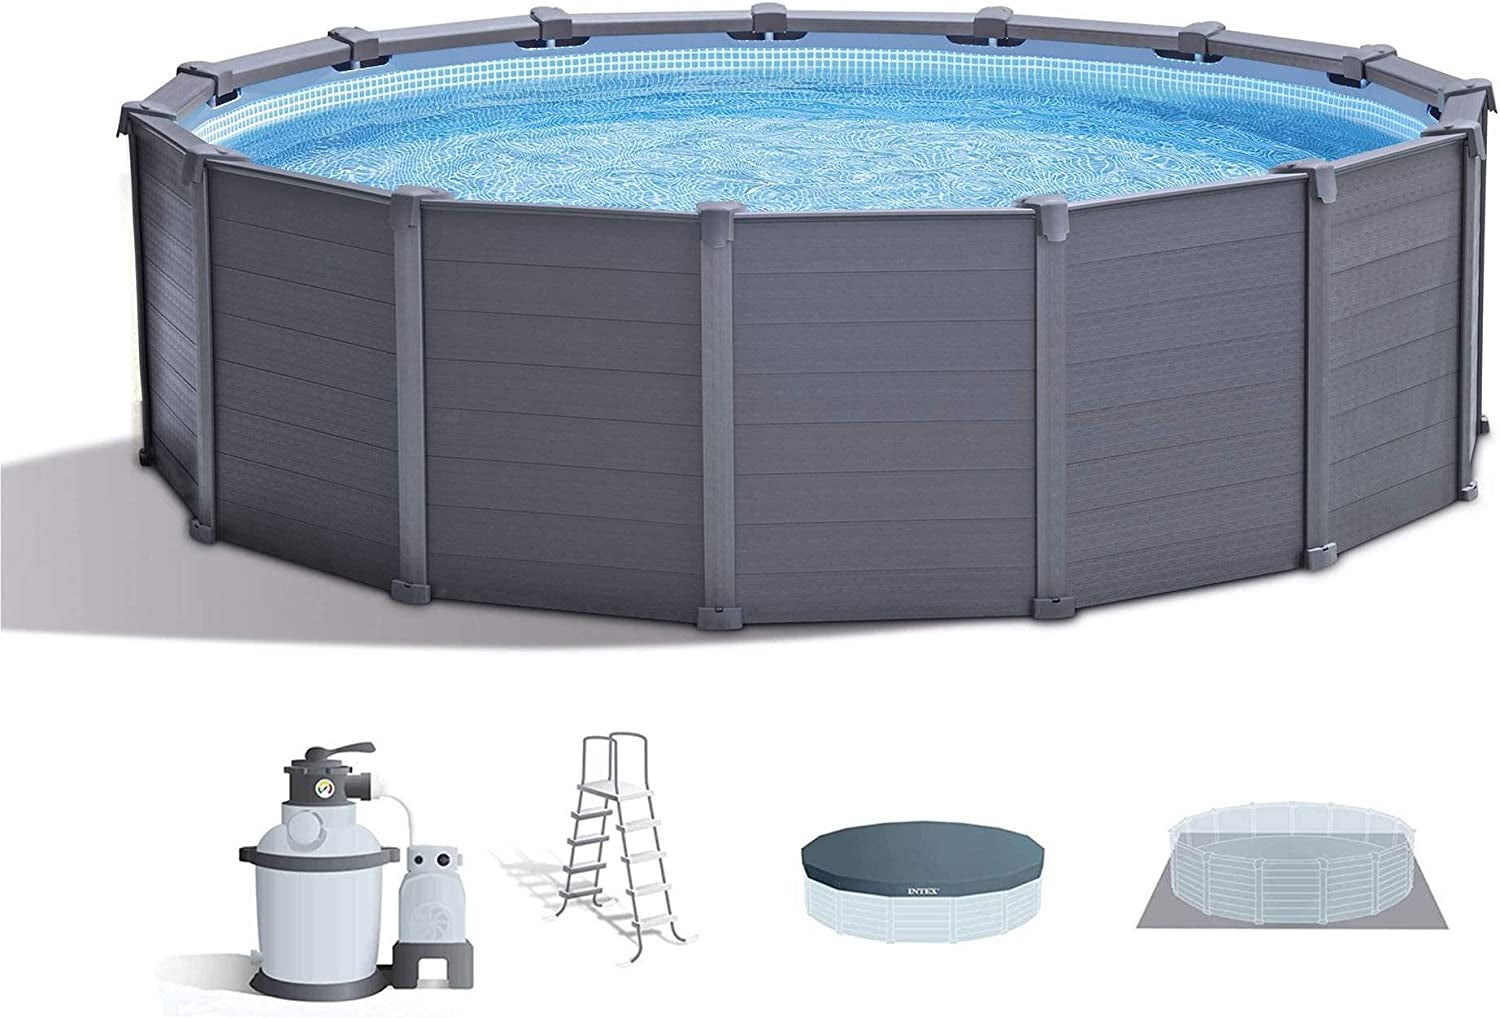 15.6Ft X 49In above Ground Swimming Pool Set W/Sand Filter Pump & Ladder